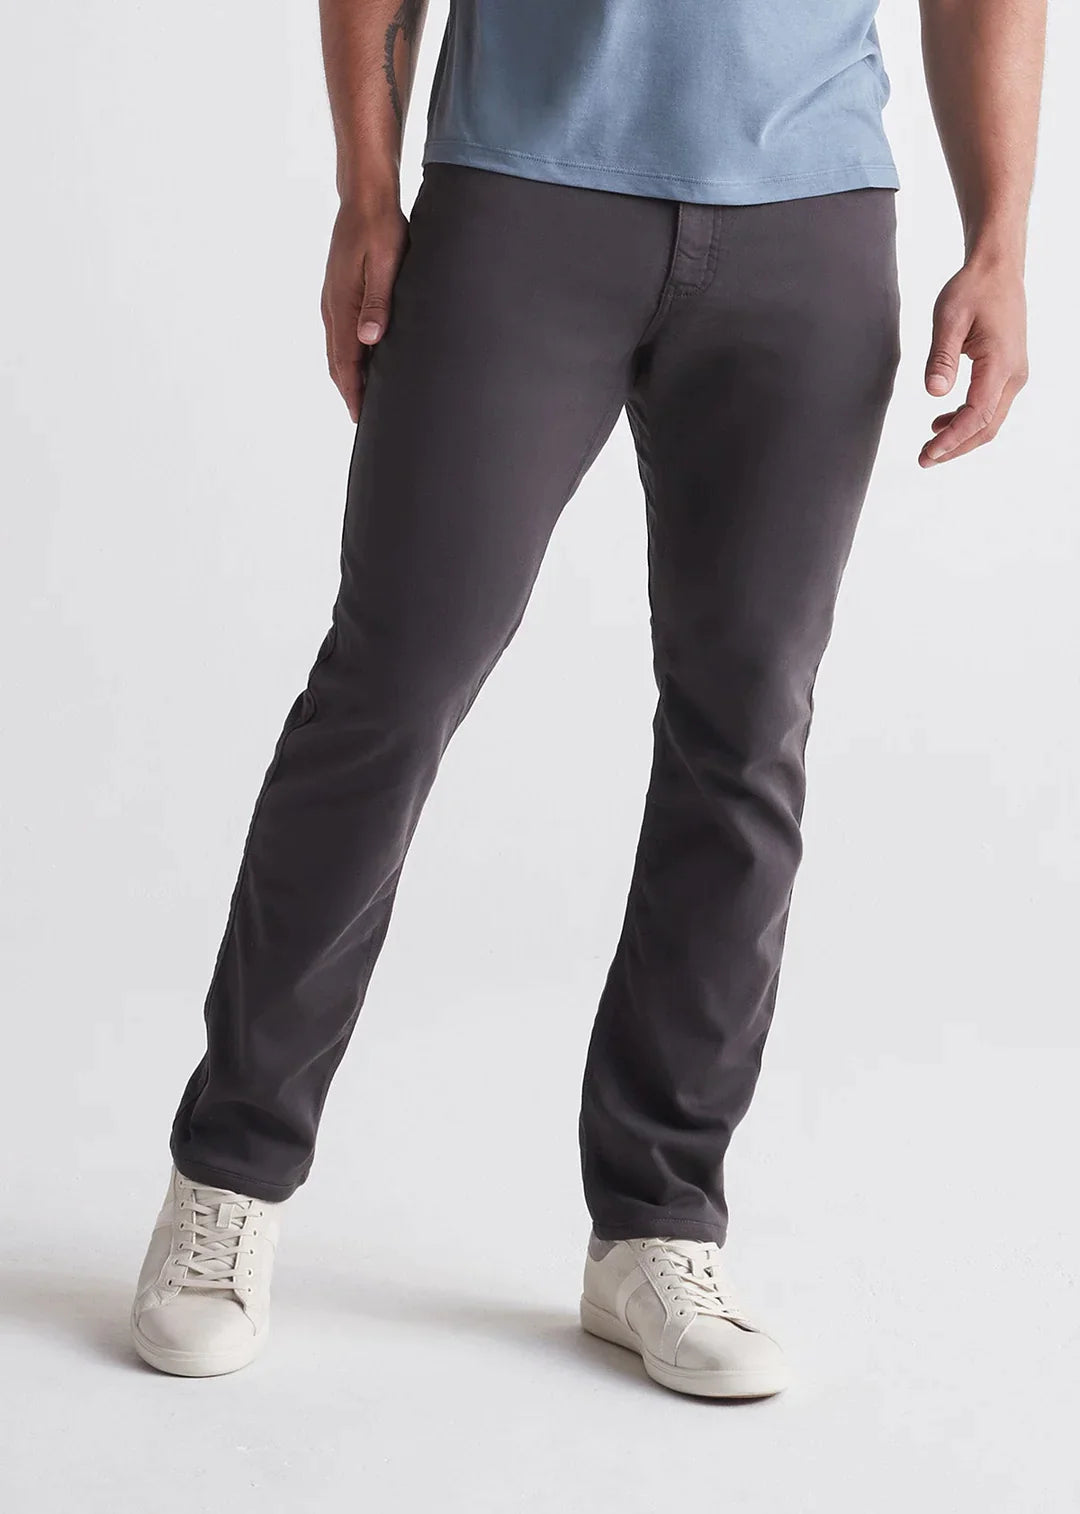 Men's No Sweat Relaxed Taper Pant